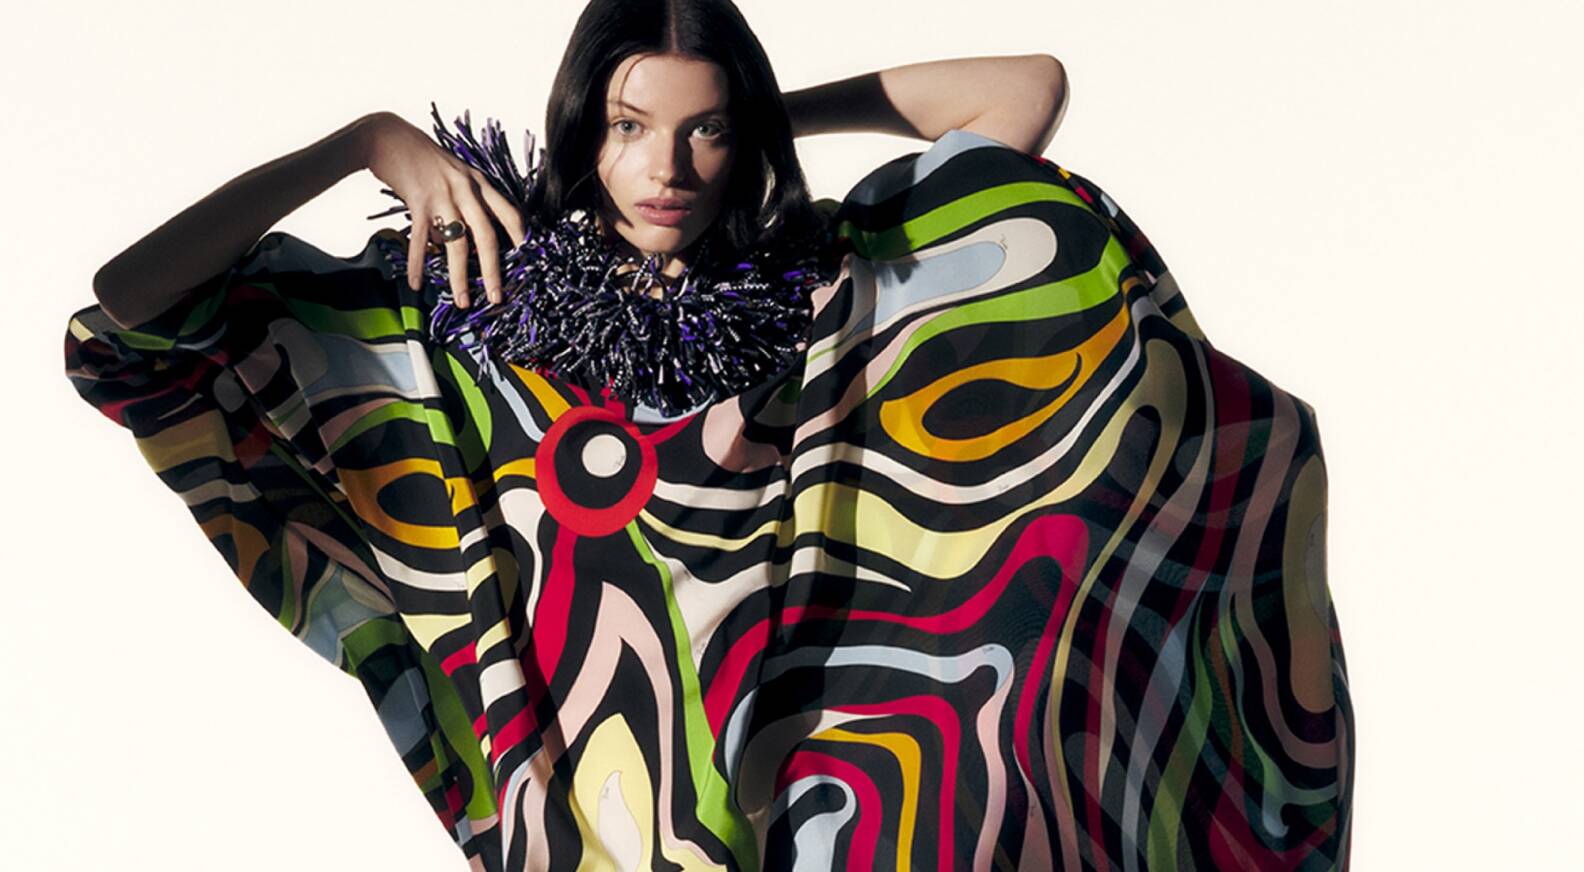 Emilio Pucci - A Brand Couture with a twist - Life in Italy